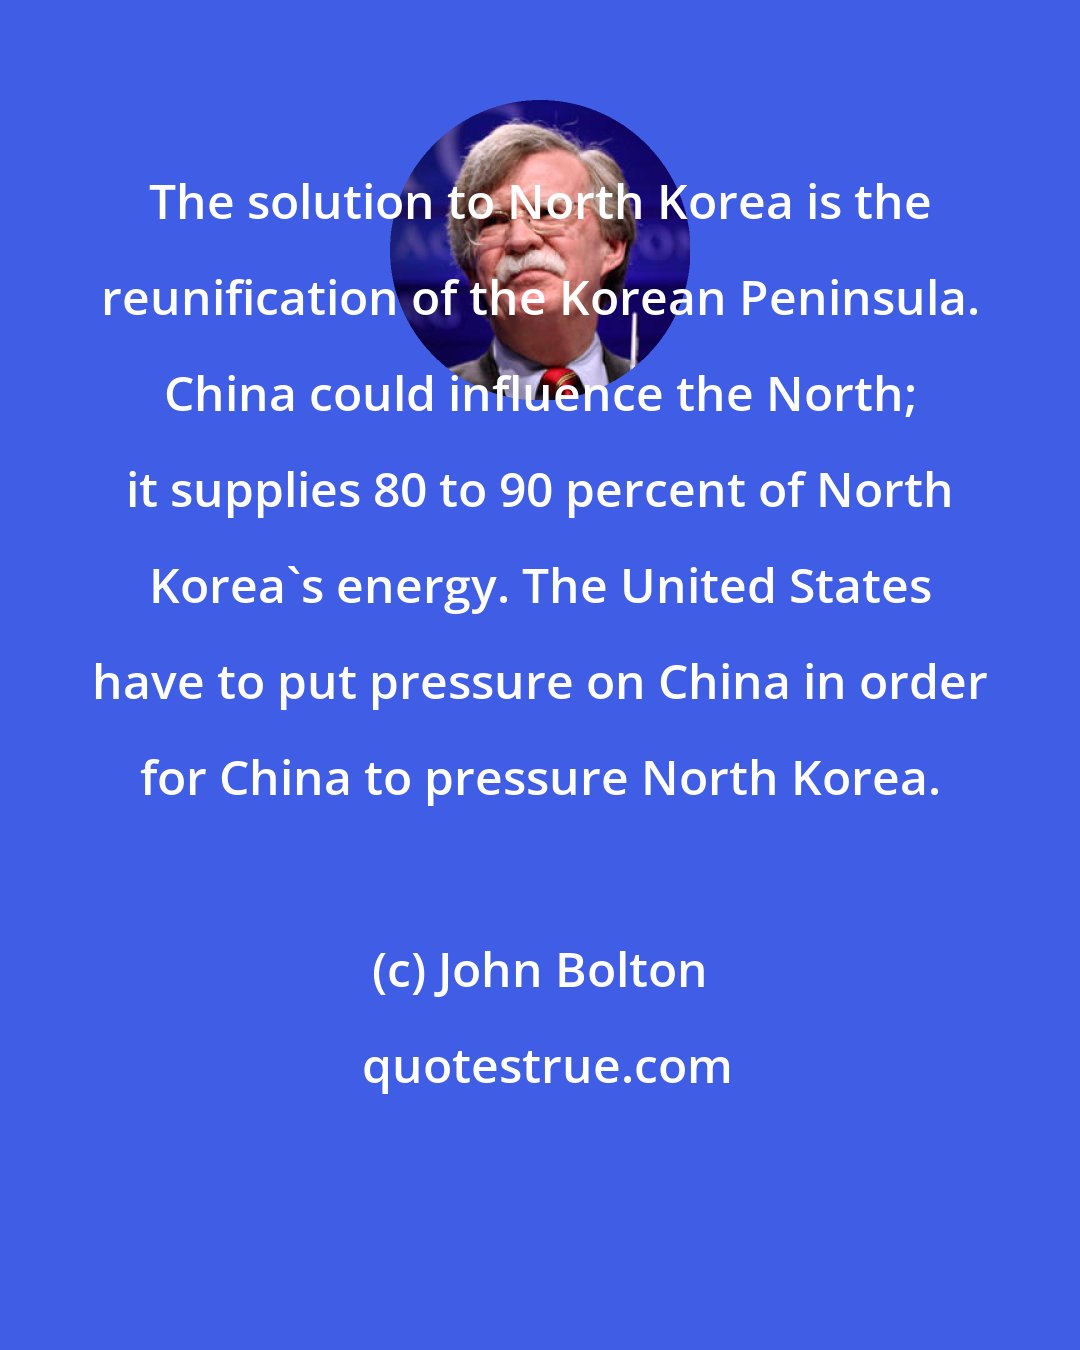 John Bolton: The solution to North Korea is the reunification of the Korean Peninsula. China could influence the North; it supplies 80 to 90 percent of North Korea's energy. The United States have to put pressure on China in order for China to pressure North Korea.